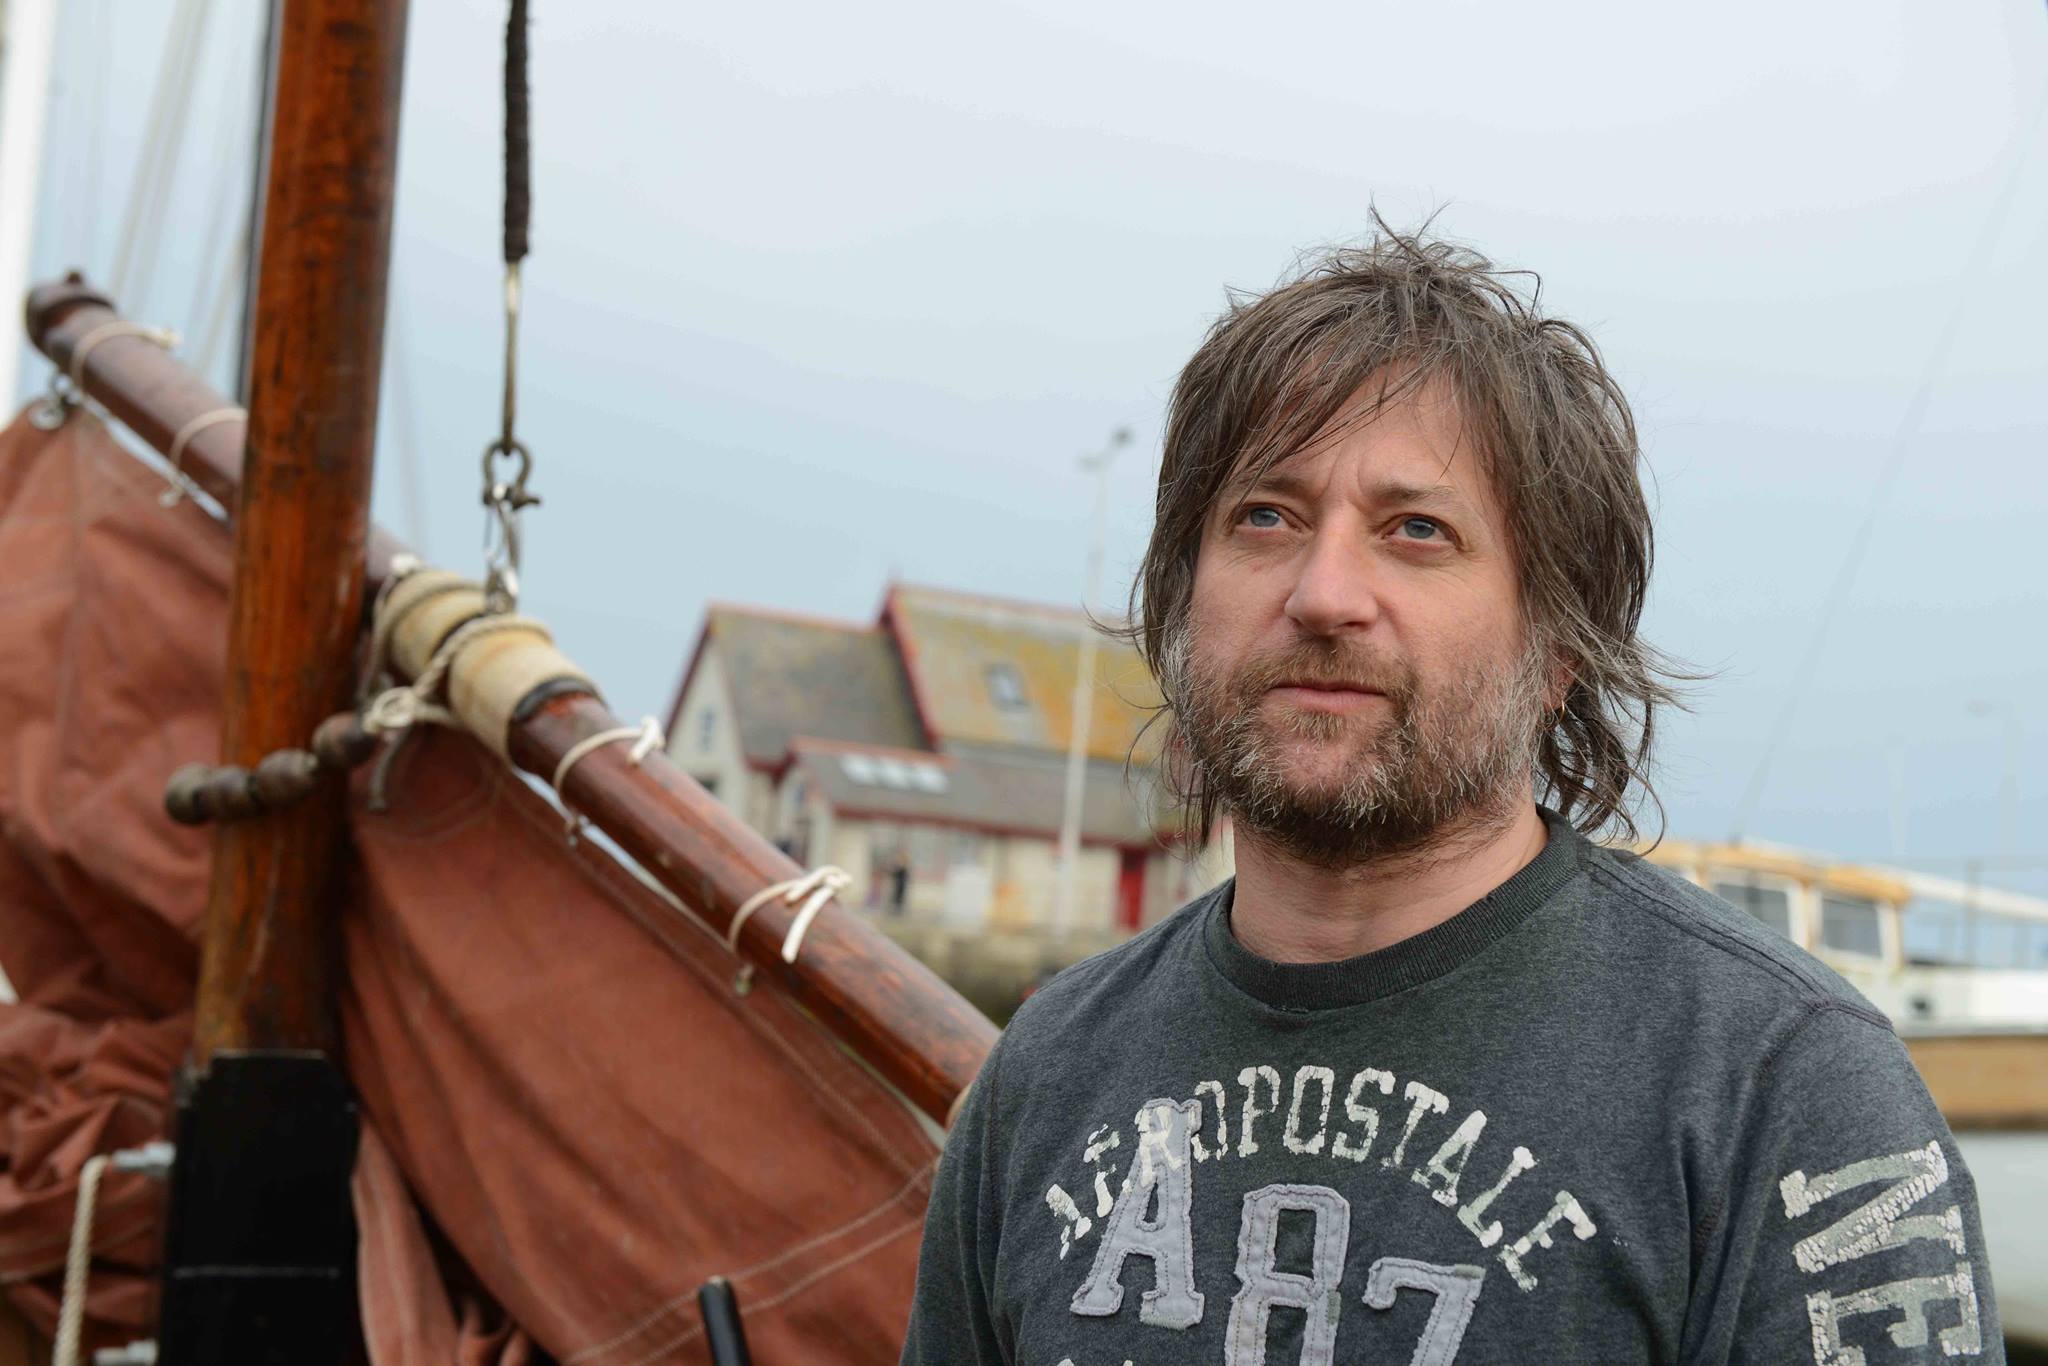 Kenny anderson aka king creosote torrent 5x09 merlin sub ita torrent